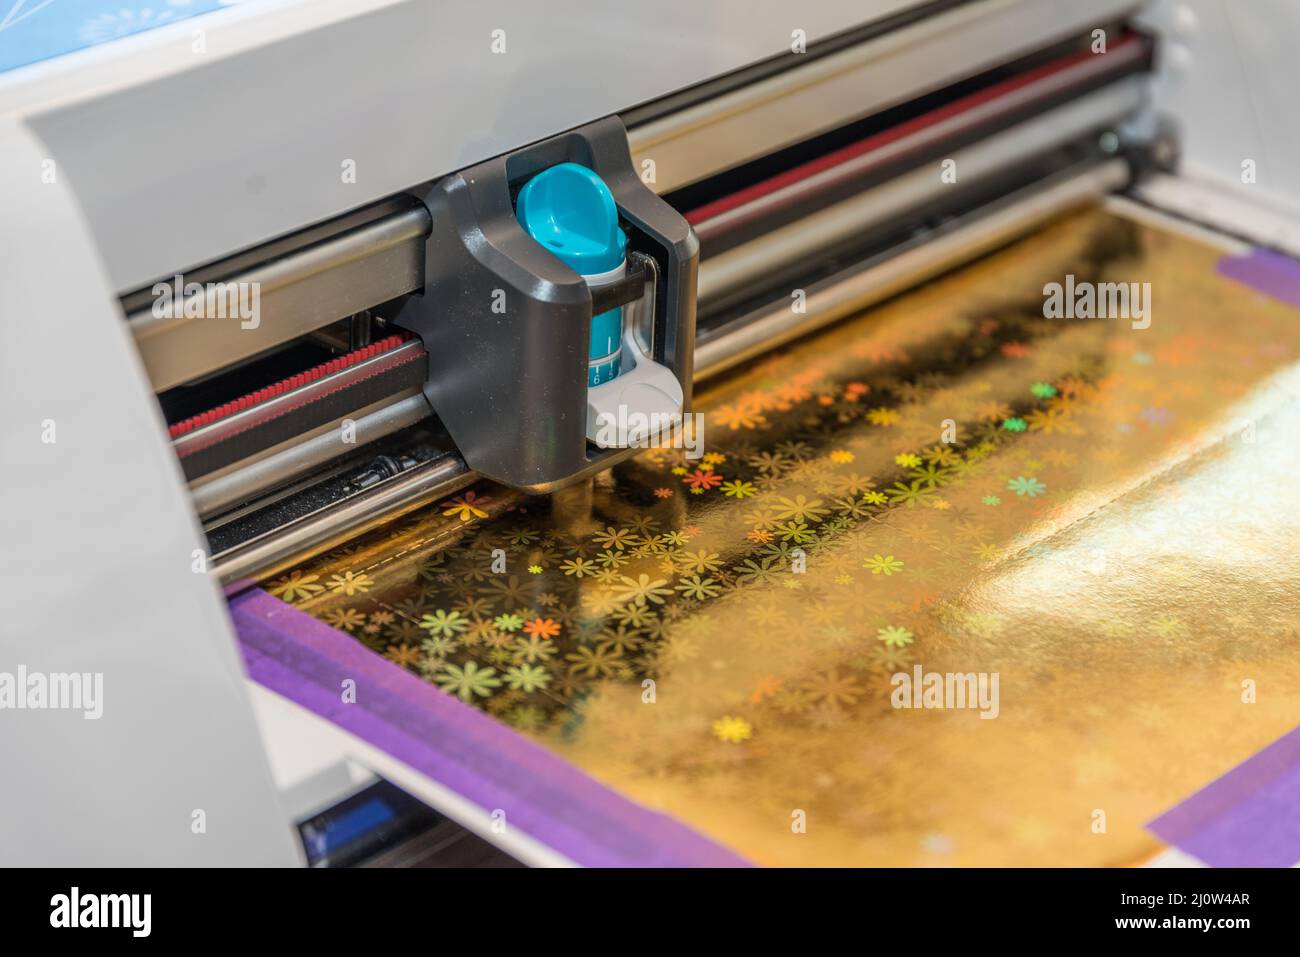 Digital output device - plotter and printer, IT Stock Photo